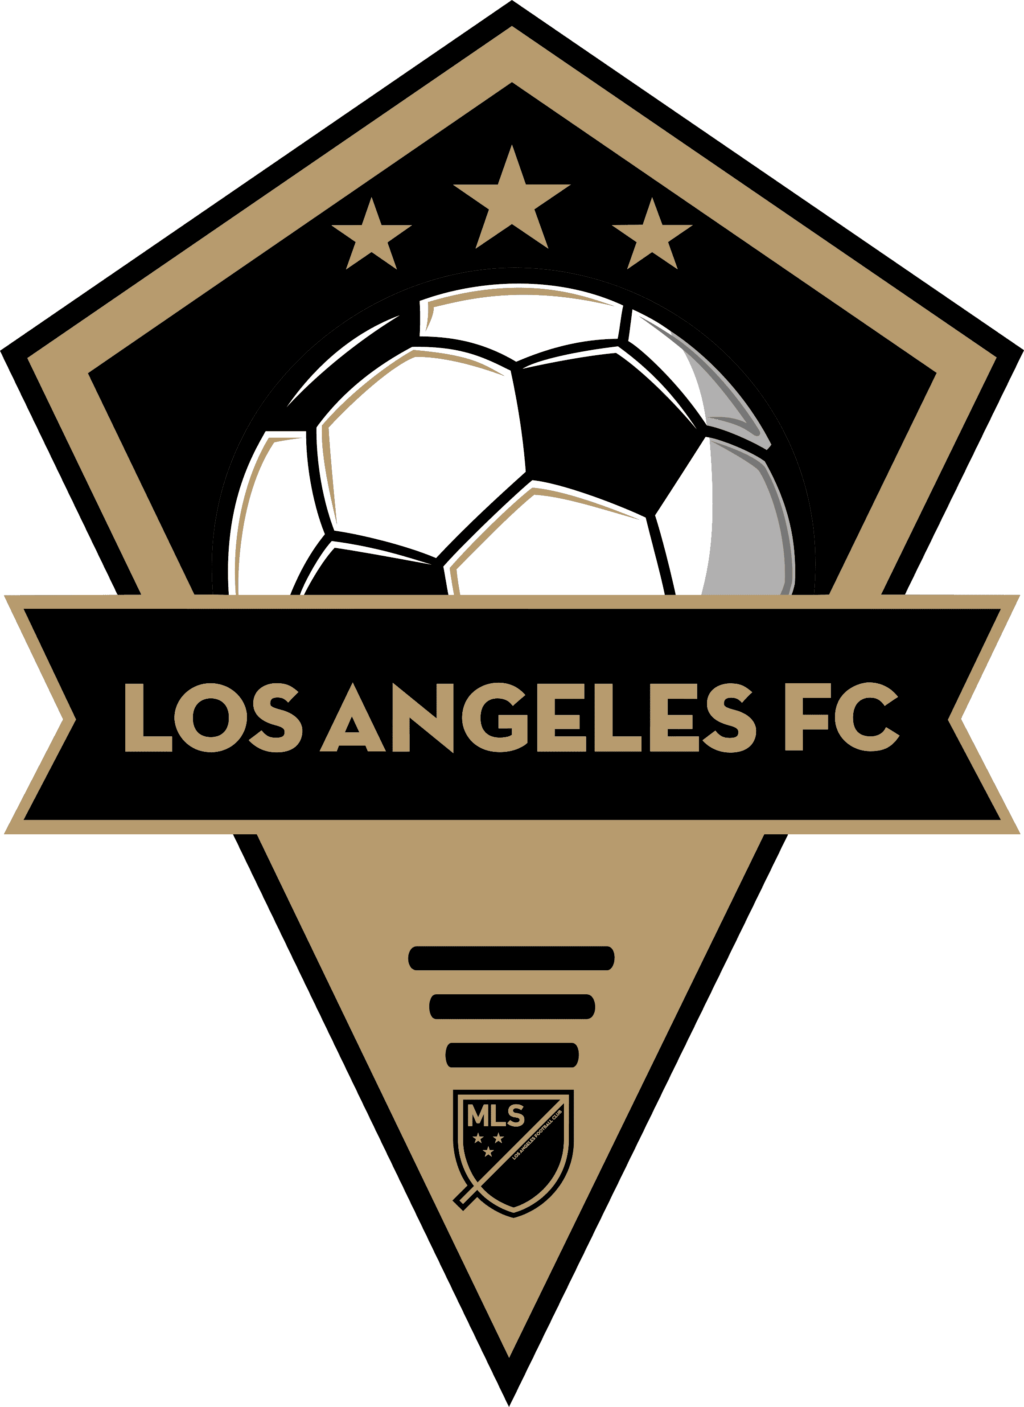 LAFC 11 MLS Logo LAFC (Los Angeles Football Club), LAFC SVG, Vector LAFC, Clipart LAFC, Football Kit LAFC, SVG, DXF, PNG, Soccer Logo Vector LAFC, EPS download MLS-files for silhouette, files for clipping.